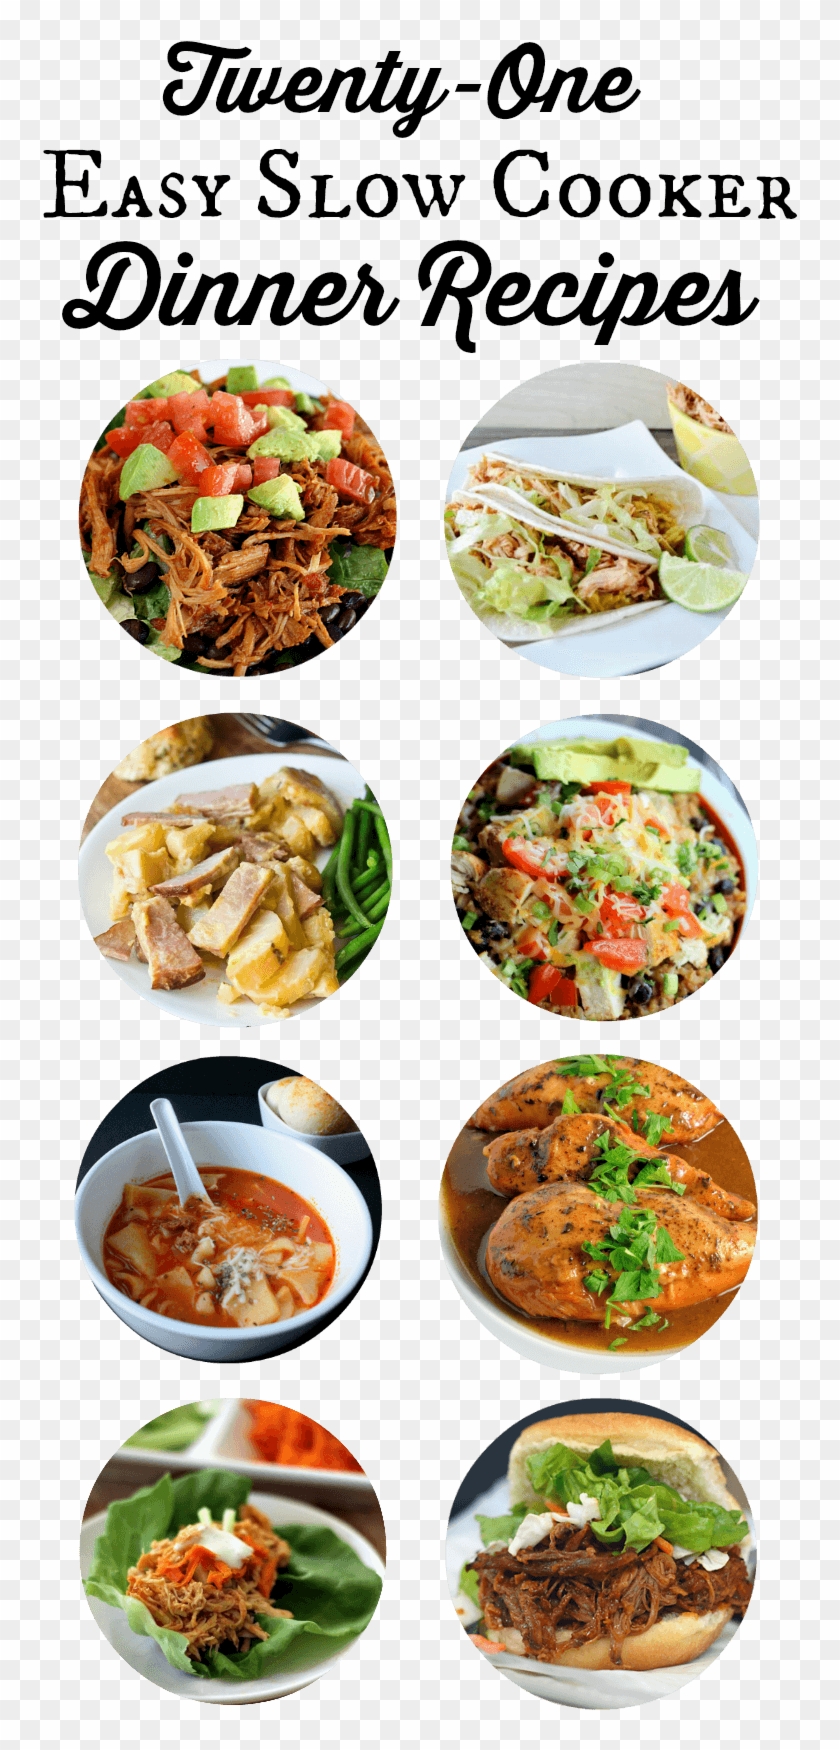 I Have A Tasty Assortment Of Slow Cooker Recipes To - Side Dish Clipart #5443764